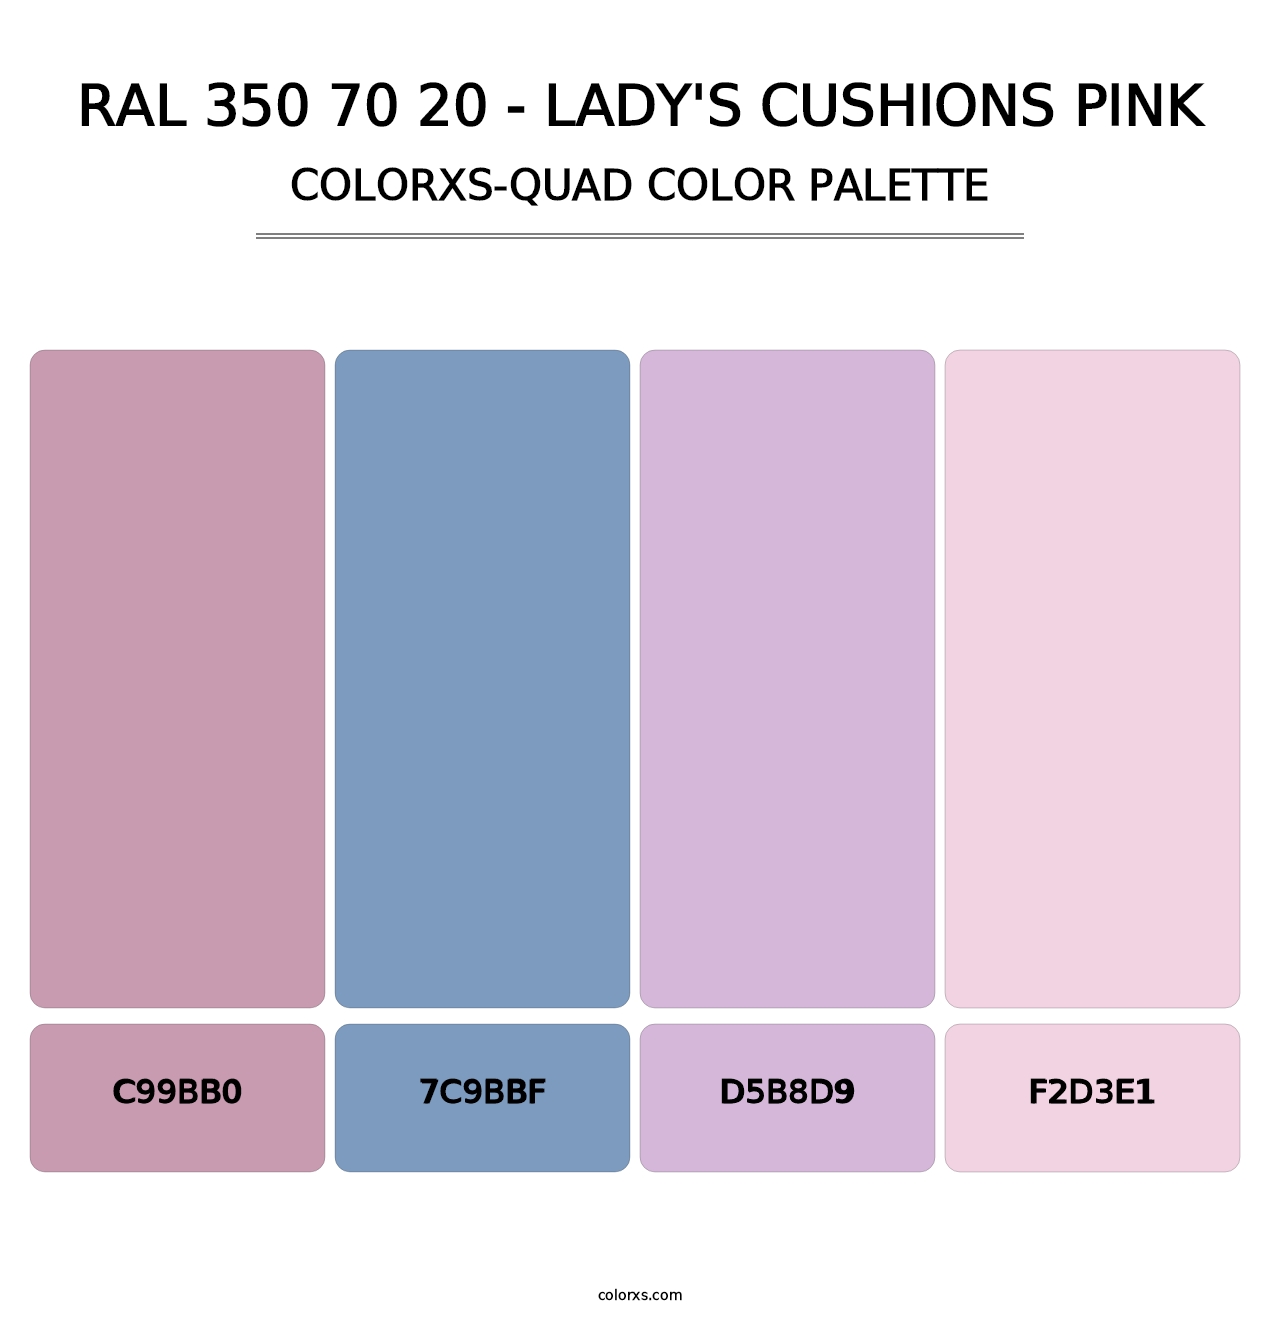 RAL 350 70 20 - Lady's Cushions Pink - Colorxs Quad Palette